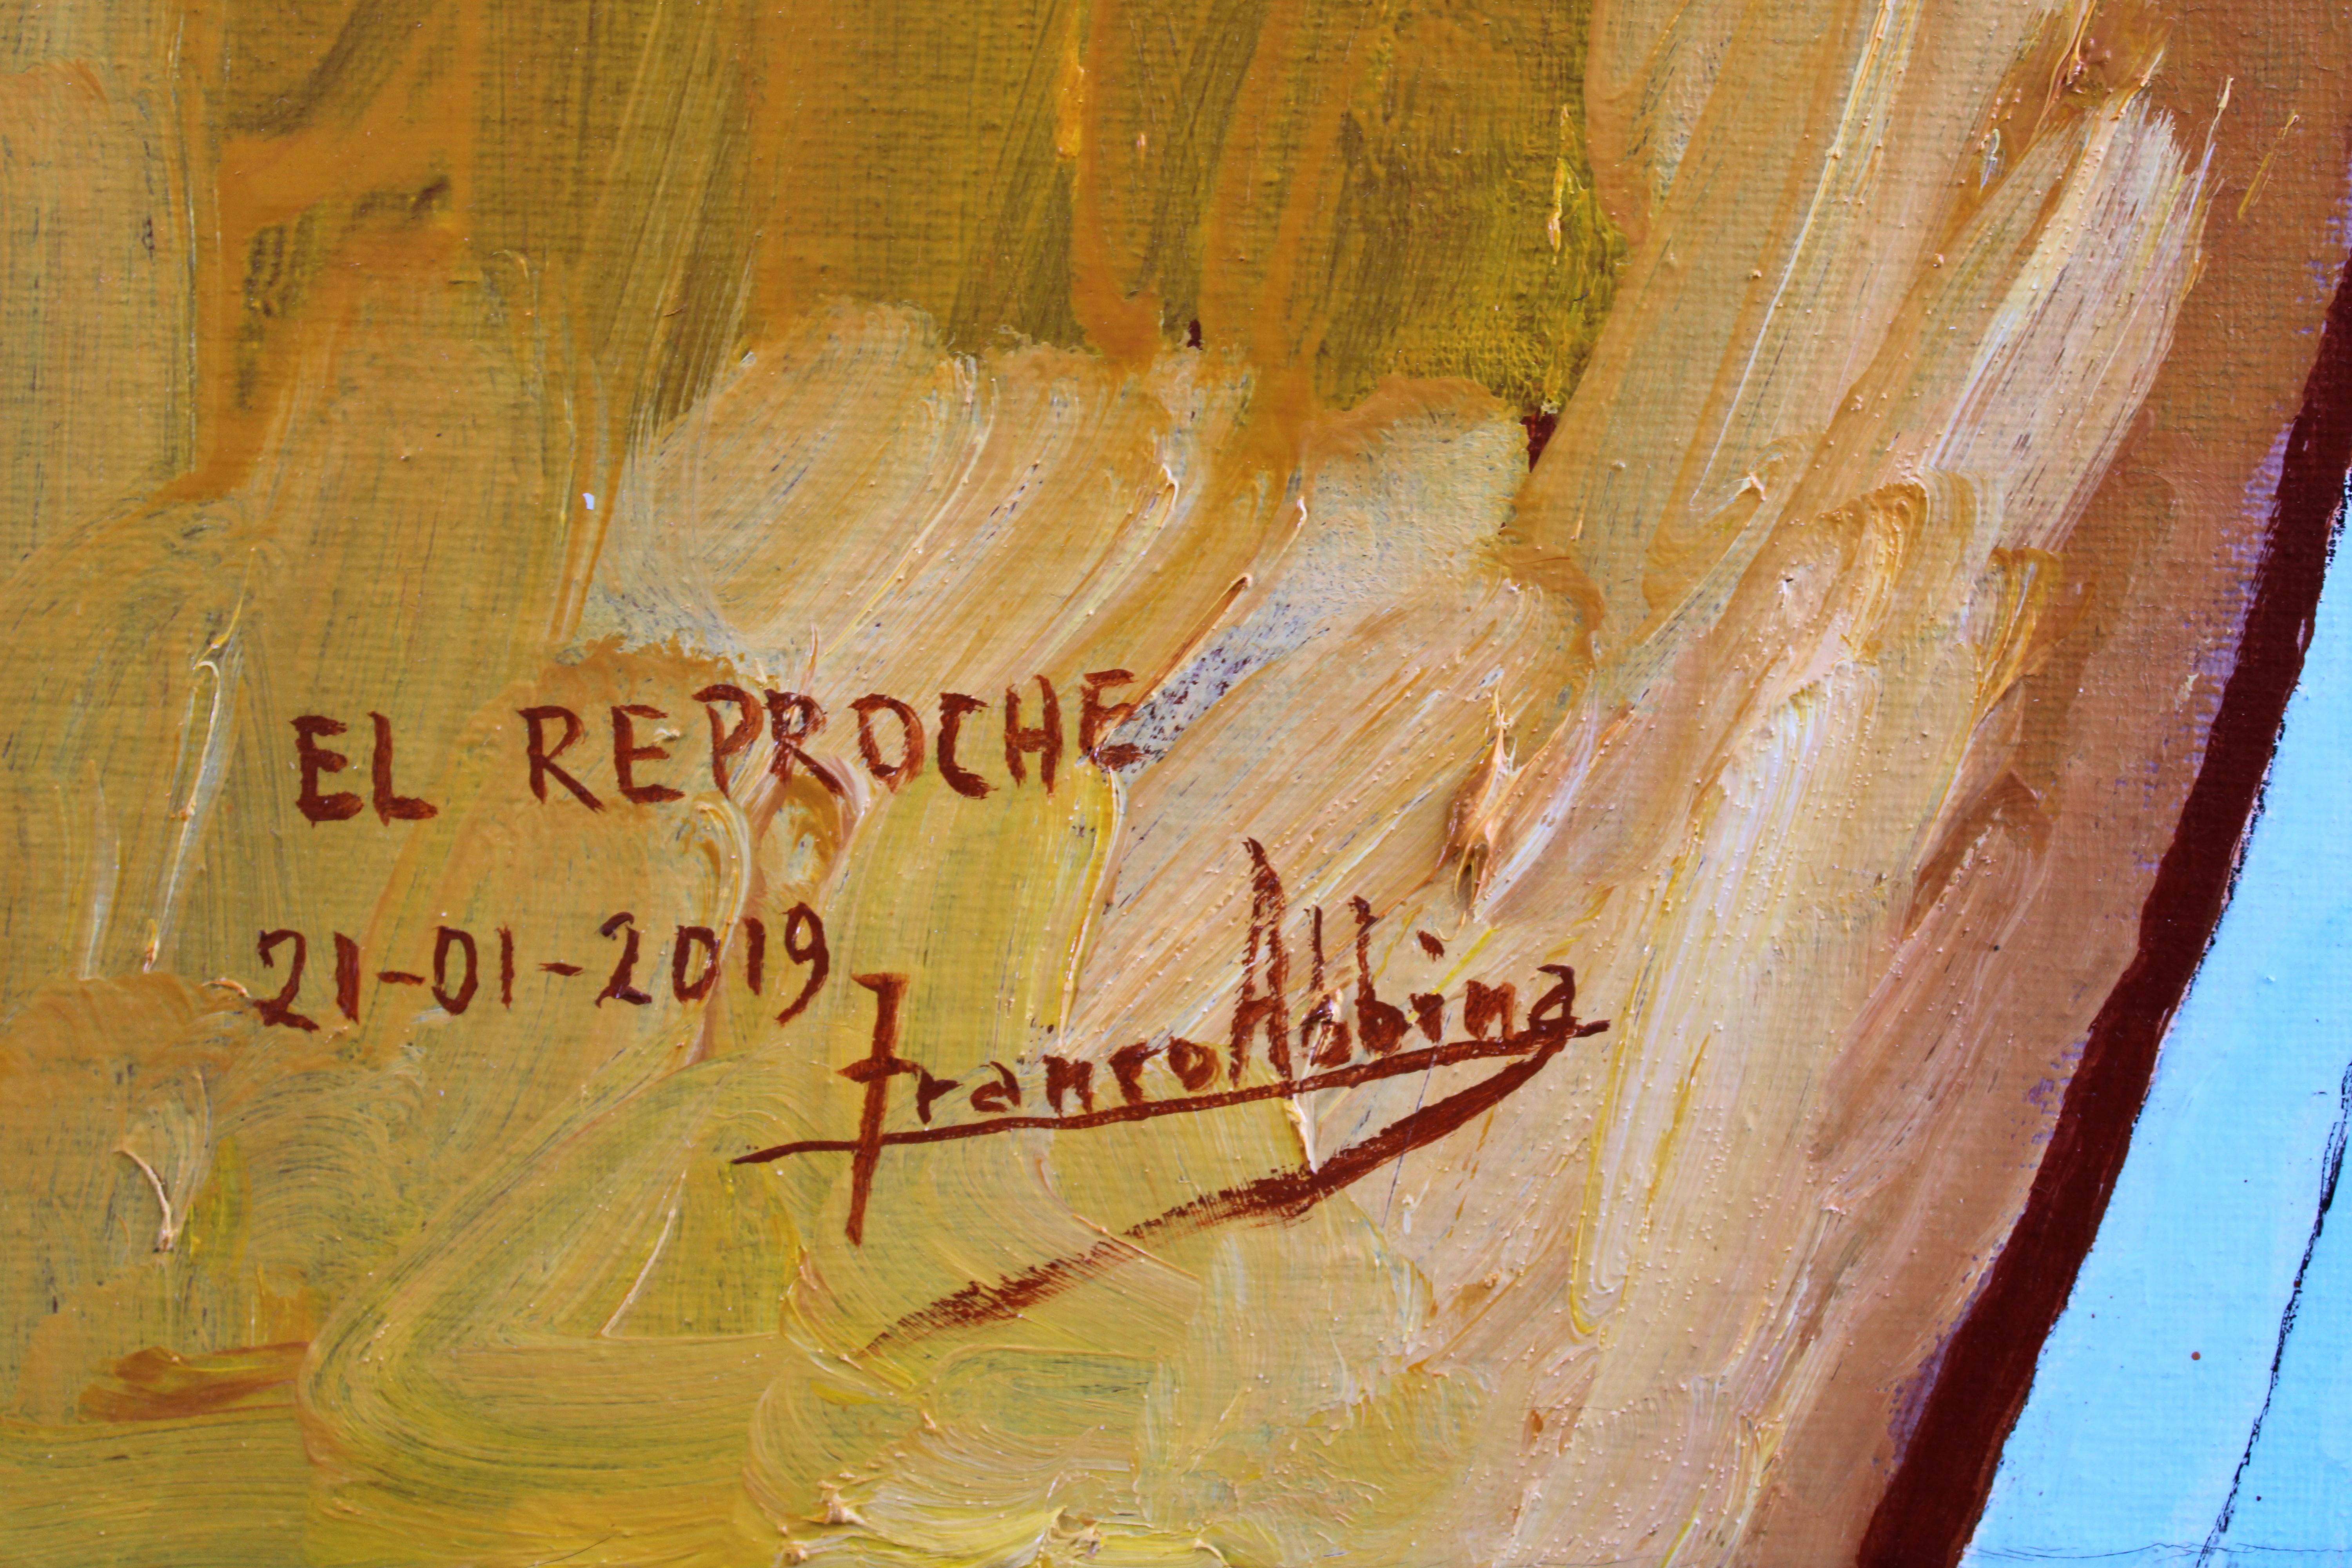 The reproach - Conceptual Painting by Abbina Franco 